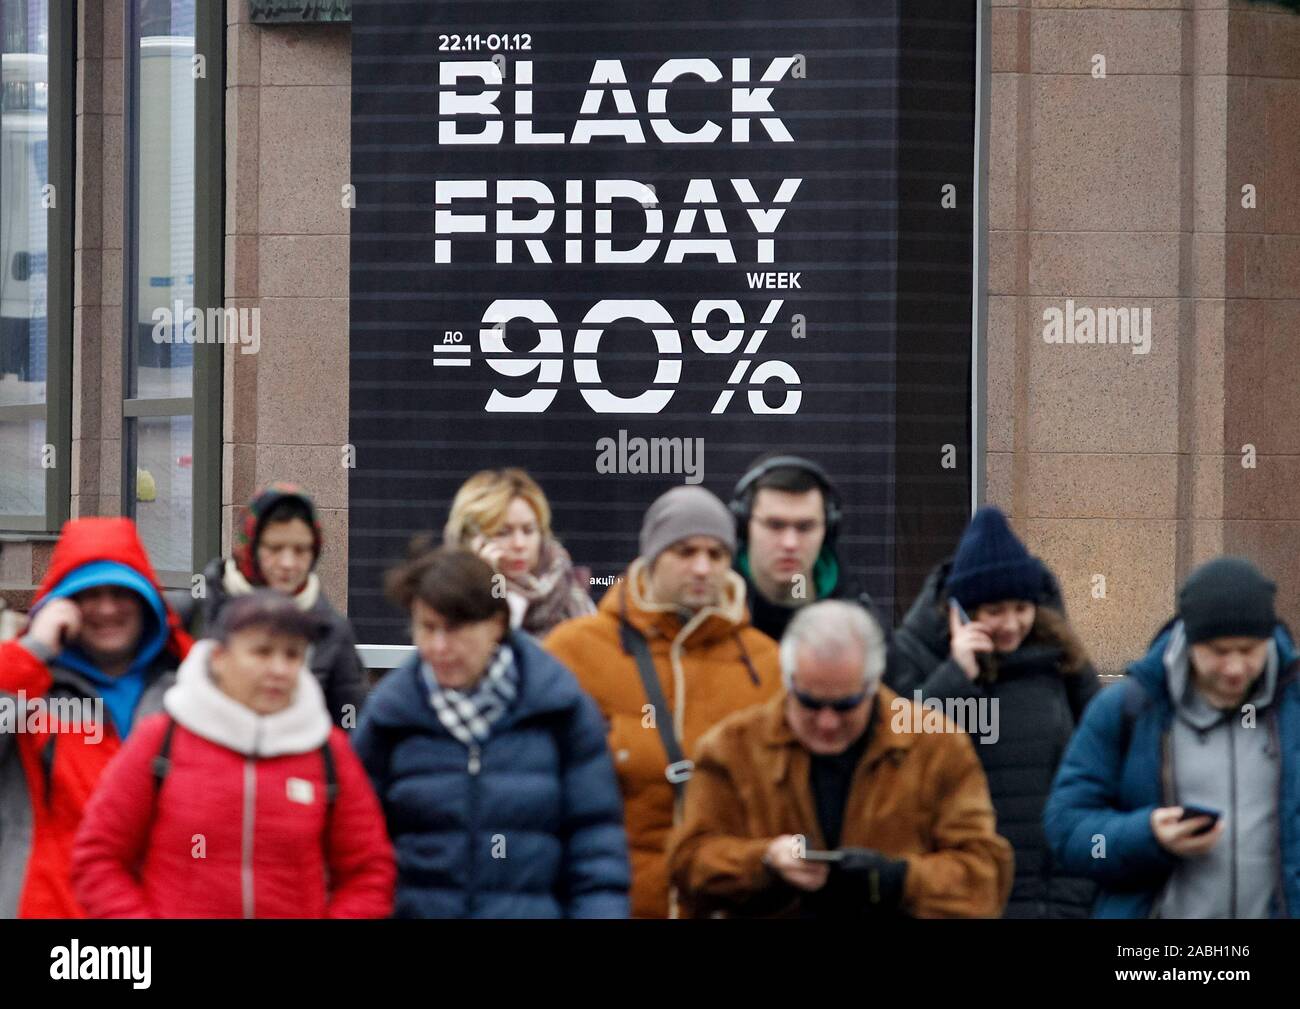 People walk passed a board with Black Friday sales discounts, outside a store. Black Friday is an informal name for the Friday following Thanksgiving Day in the United States which is celebrated on the fourth Thursday of November. The Black Friday is a sales offer to attract shoppers for the Christmas shopping season. Stock Photo